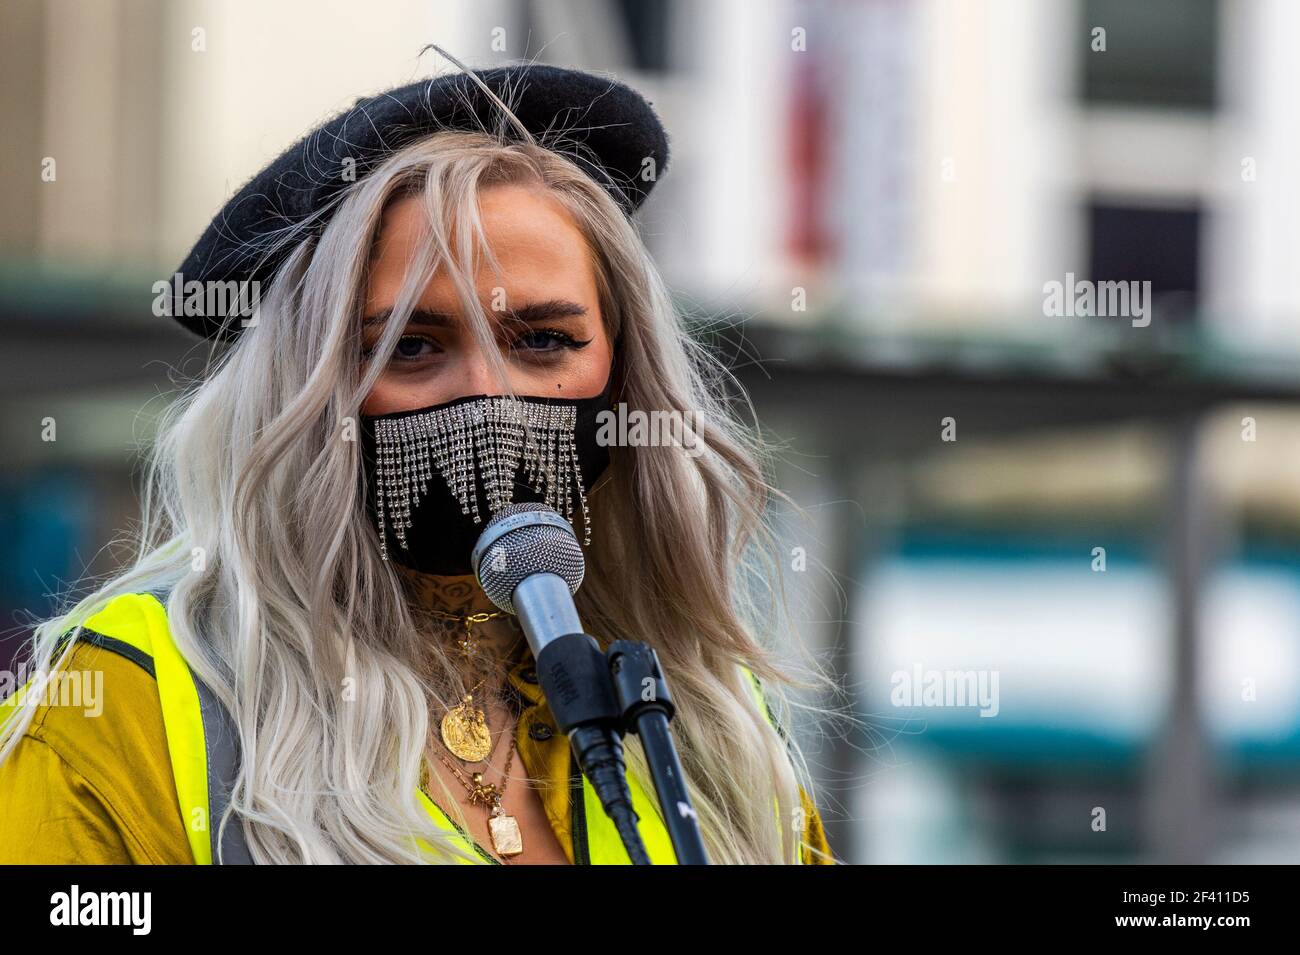 Cork, Ireland. 18th Mar, 2021. Around 150 women and men attended a 'Reclaim the Streets' protest organised by the socialist feminist group, ROSA. The protest was organised after Sarah Everard was kidnapped and murdered in London by a serving Metropolitan Police officer. Credit: AG News/Alamy Live News Stock Photo